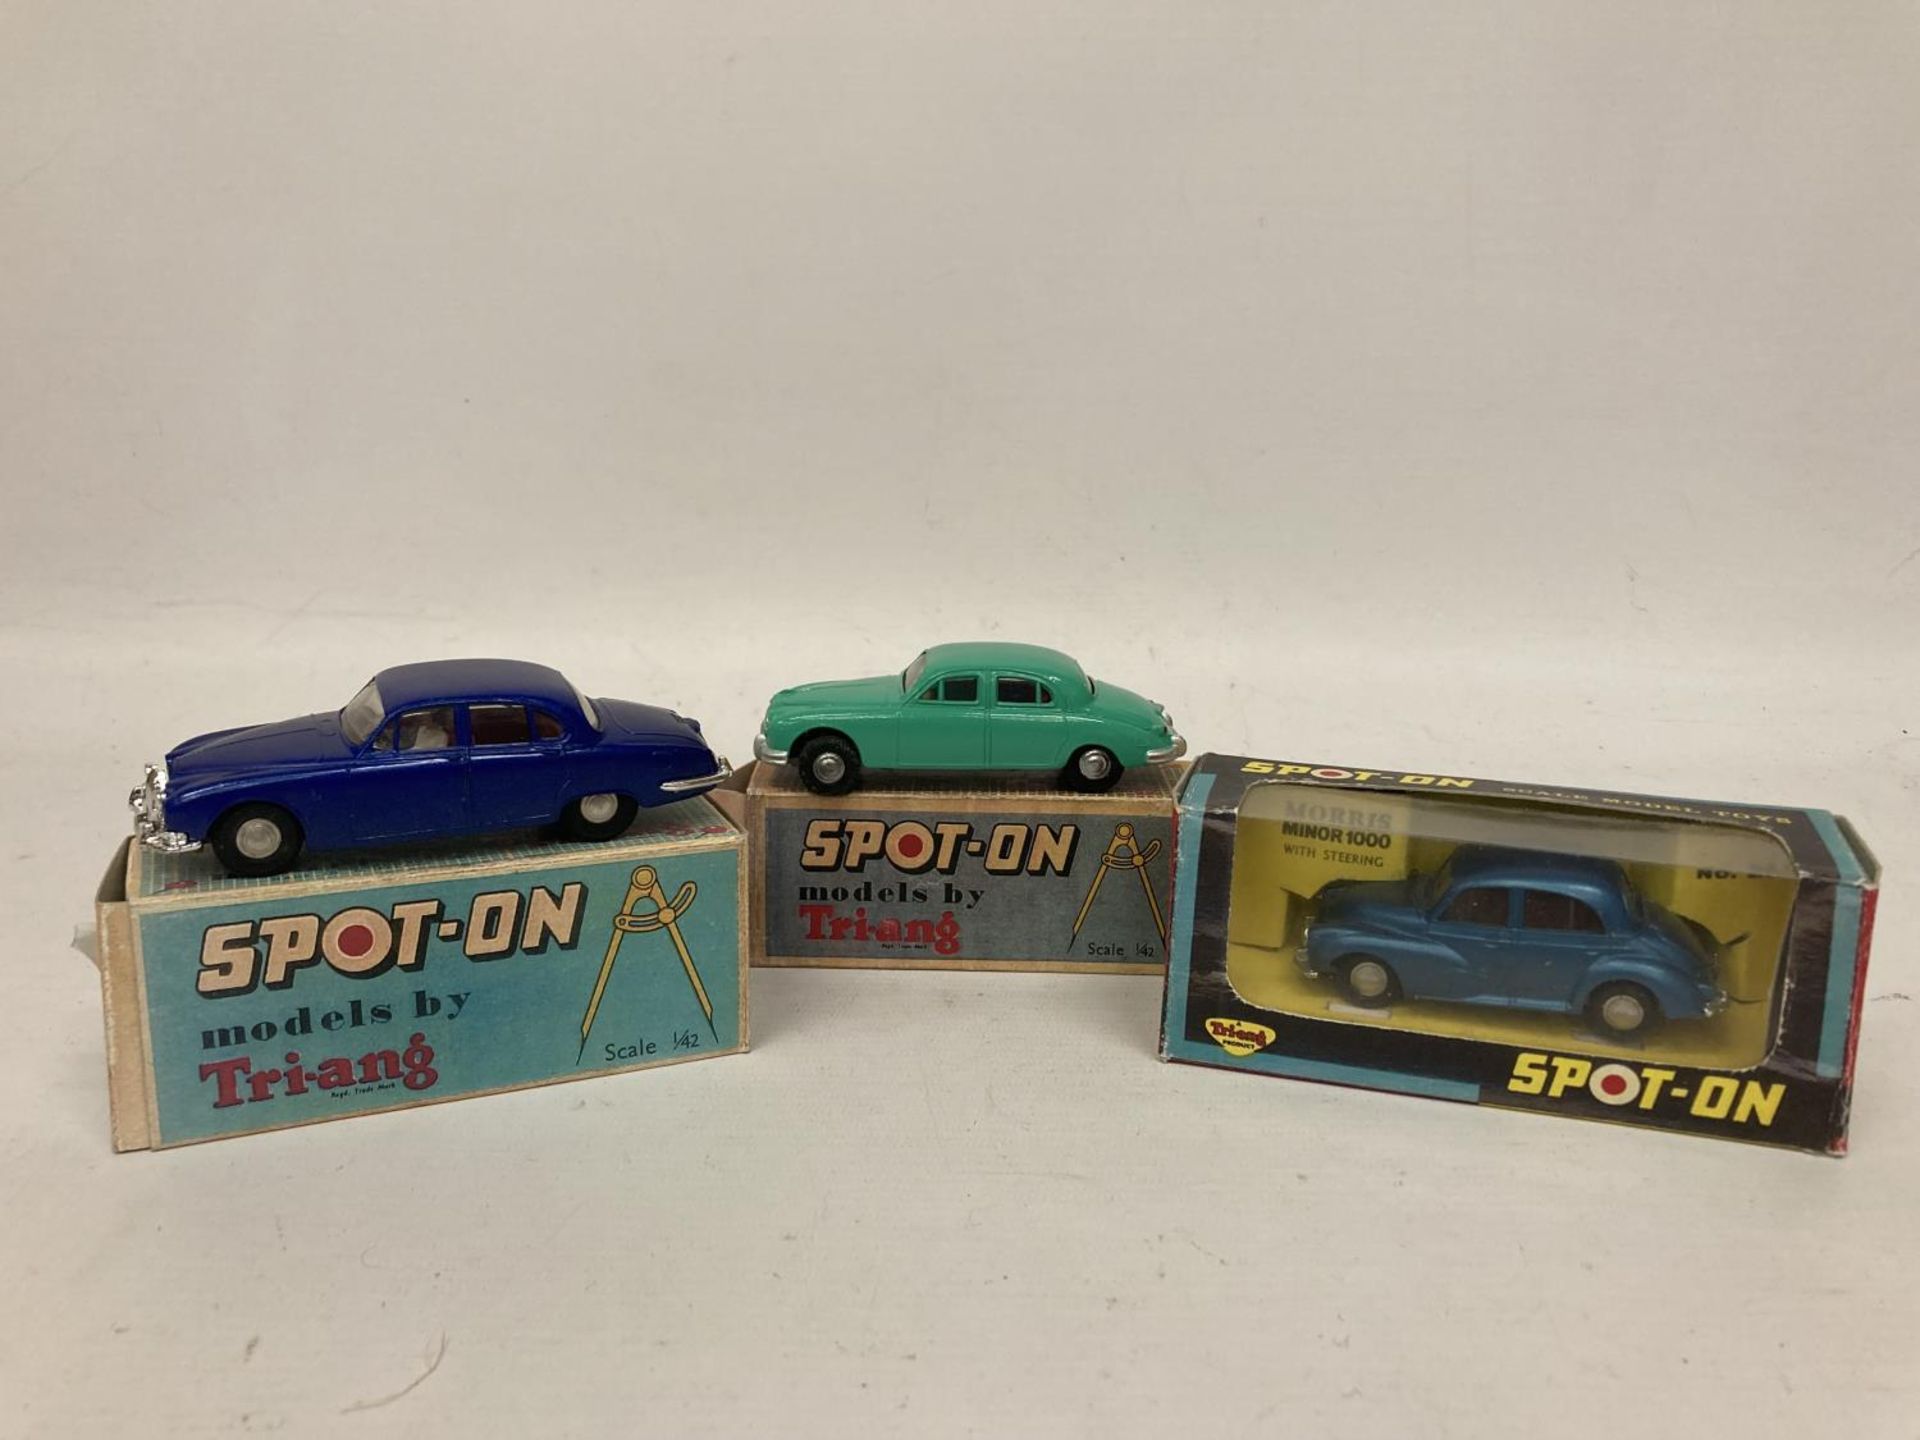 THREE SPOT-ON BOXED MODELS TO INCLUDE A MORRIS MINOR 1000 (NO 289), A JAGUAR S-TYPE (NO 276) AND A